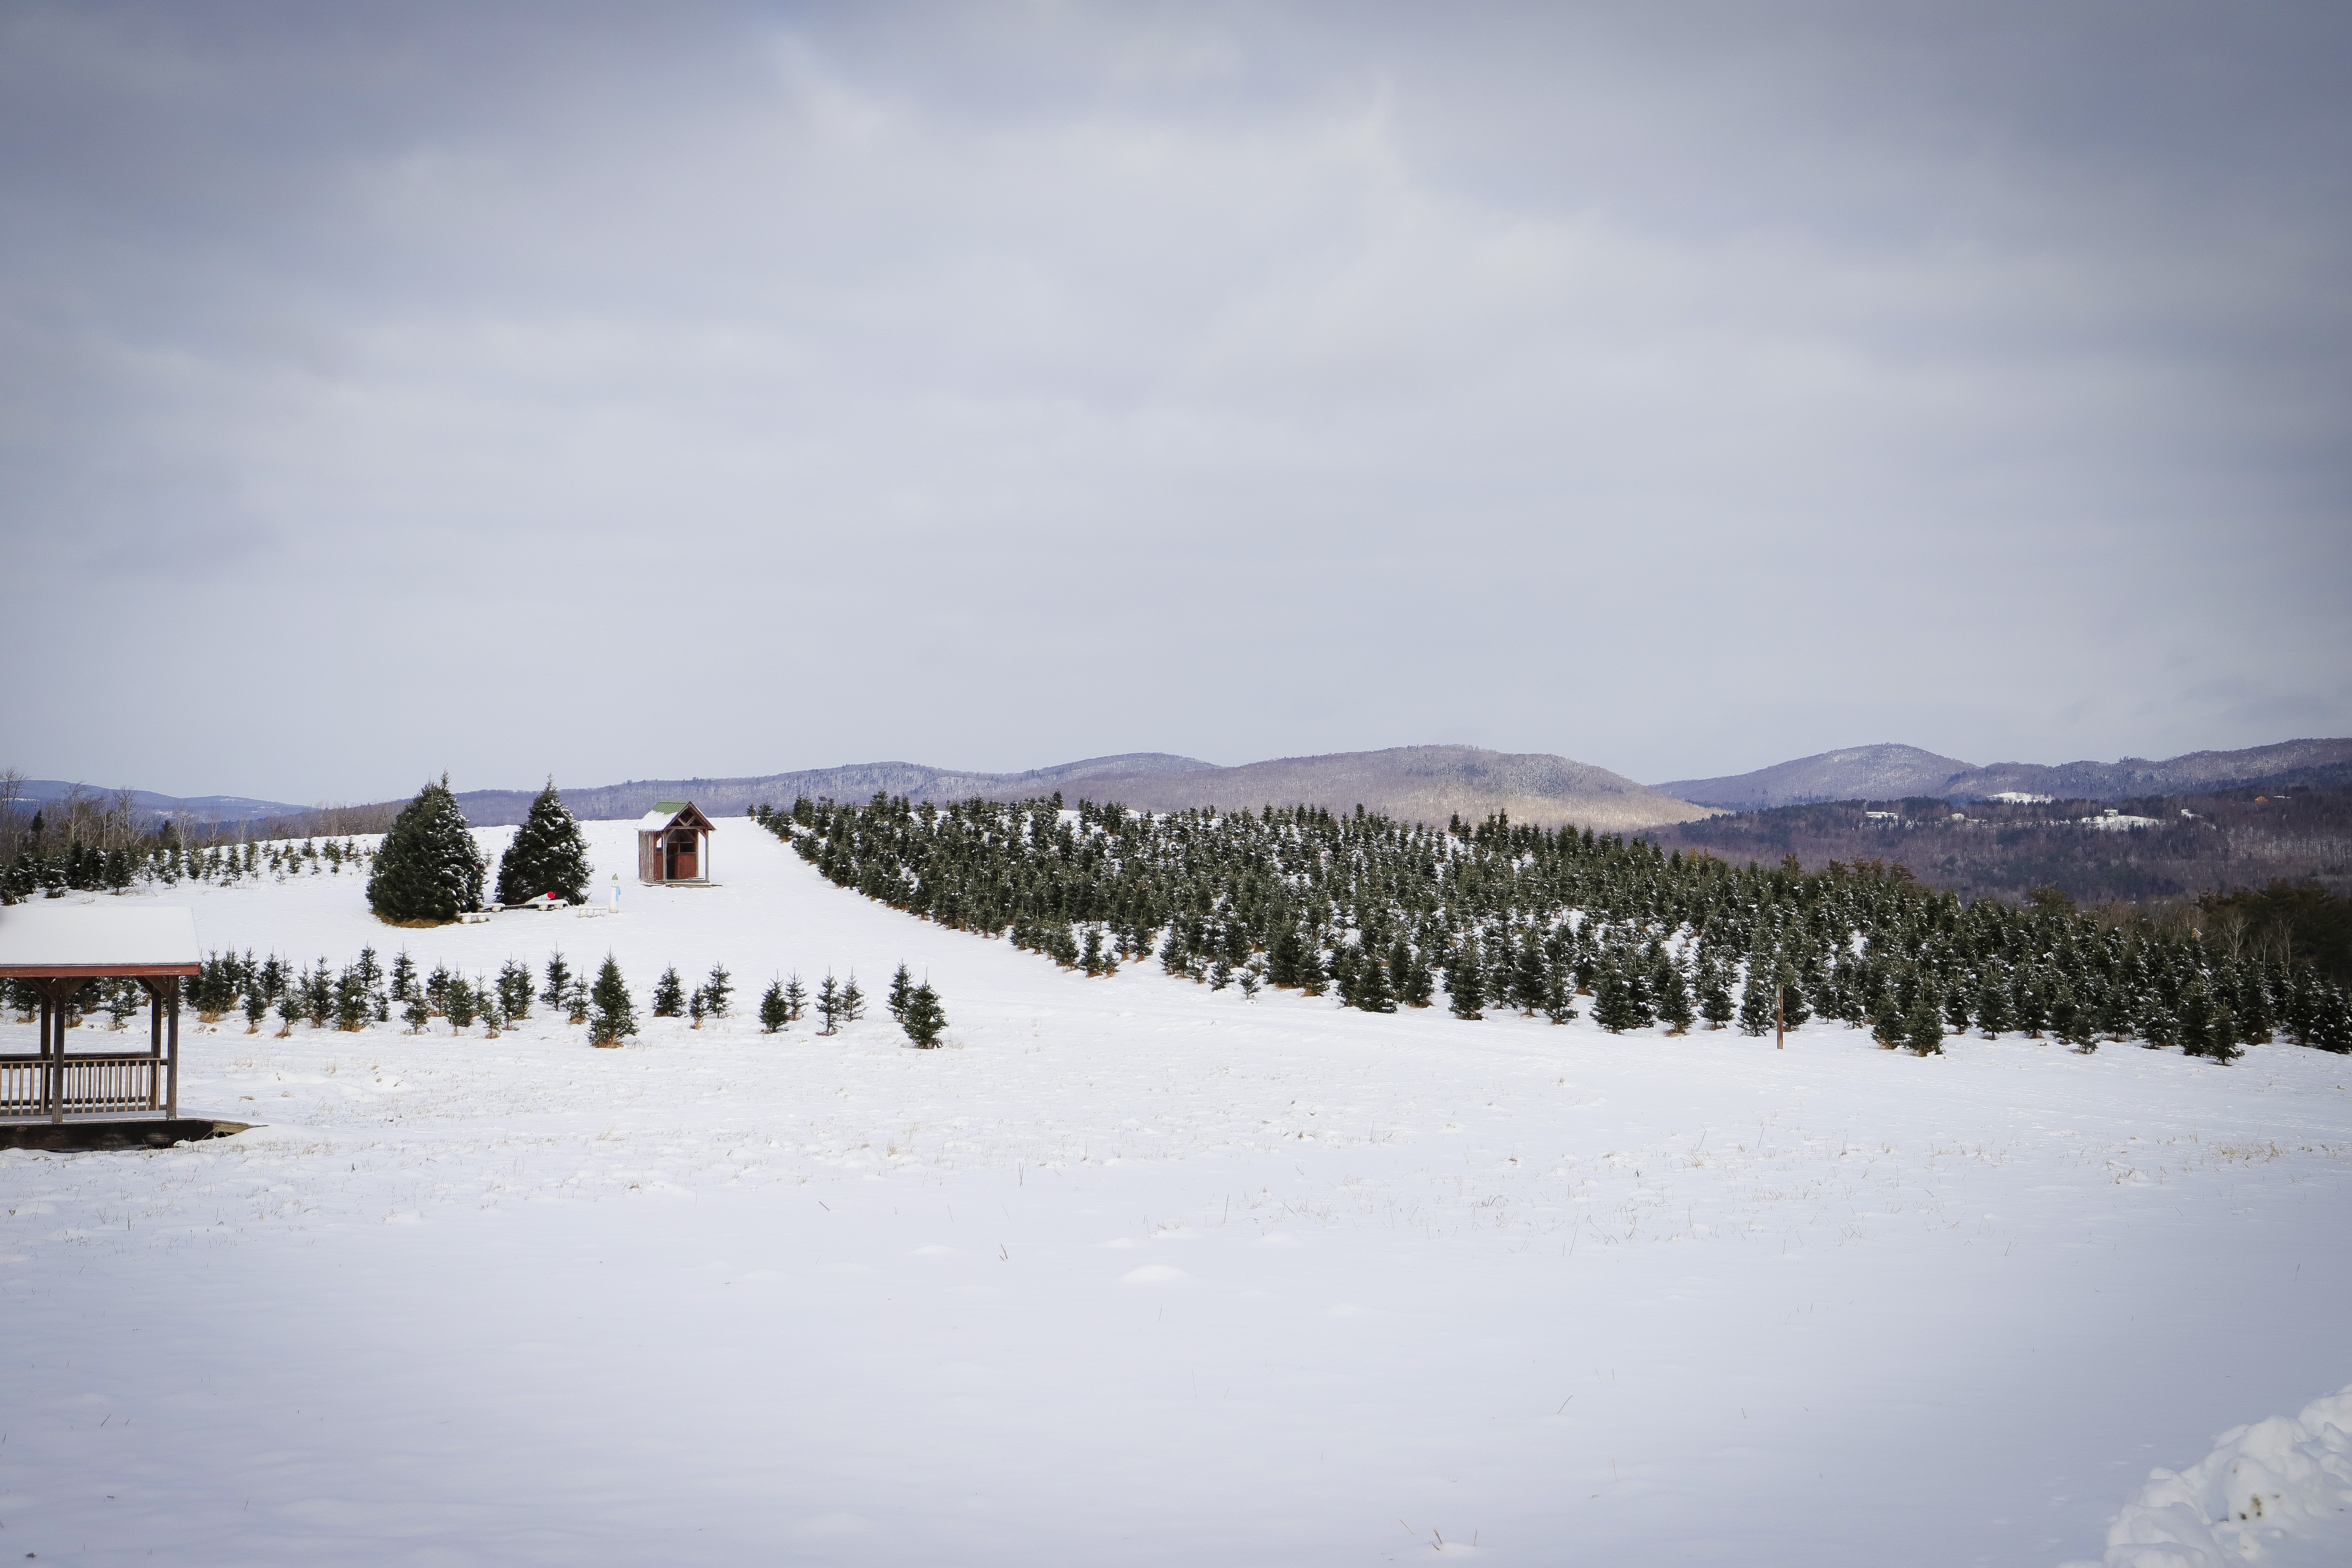 A view of the Christmas tree fields in winter.